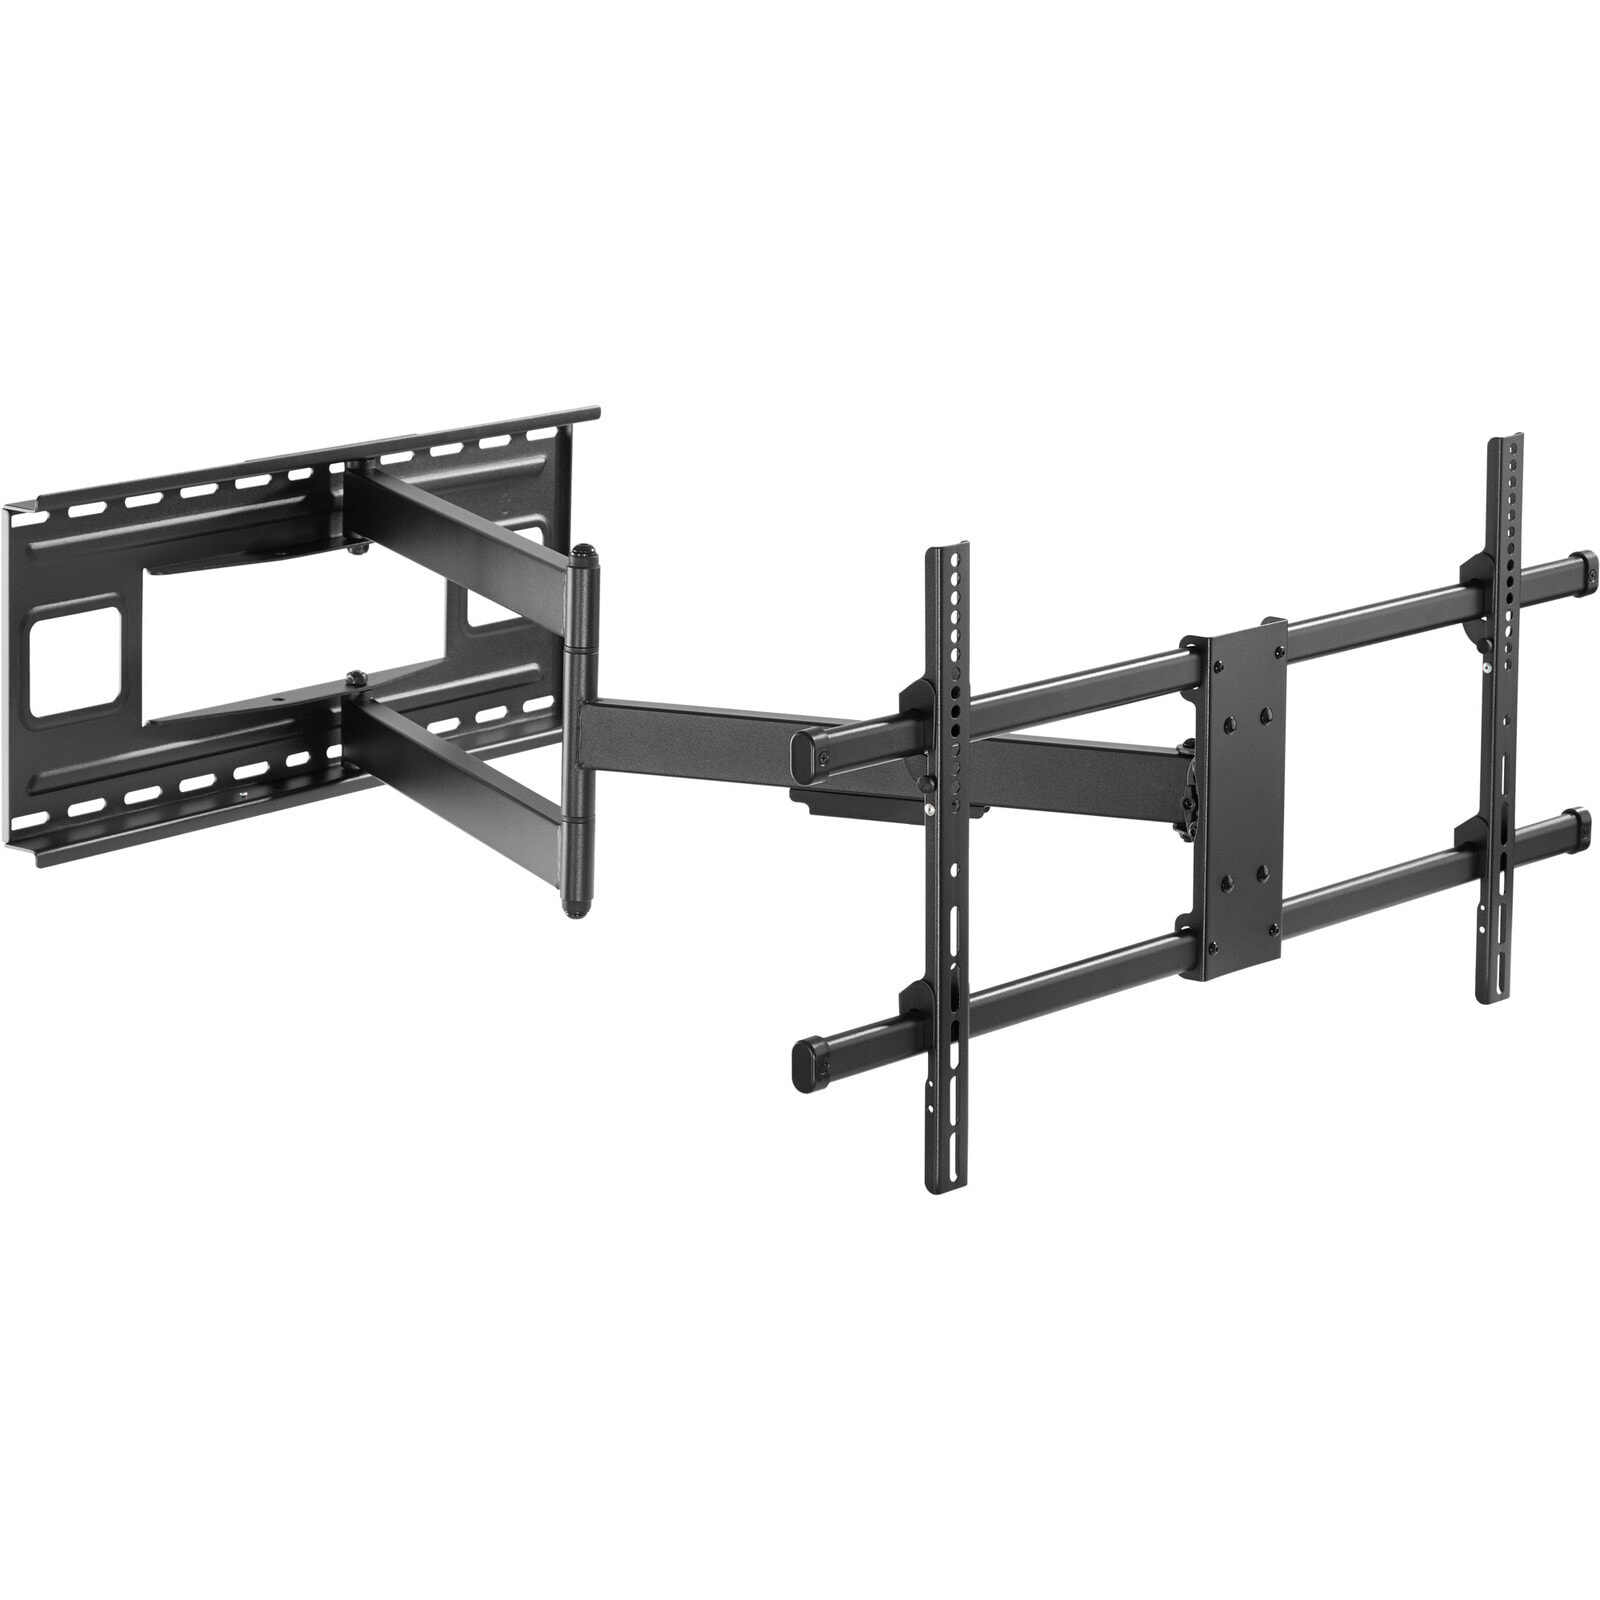 XL-Arm Full-Motion TV Wall Mount - for 43